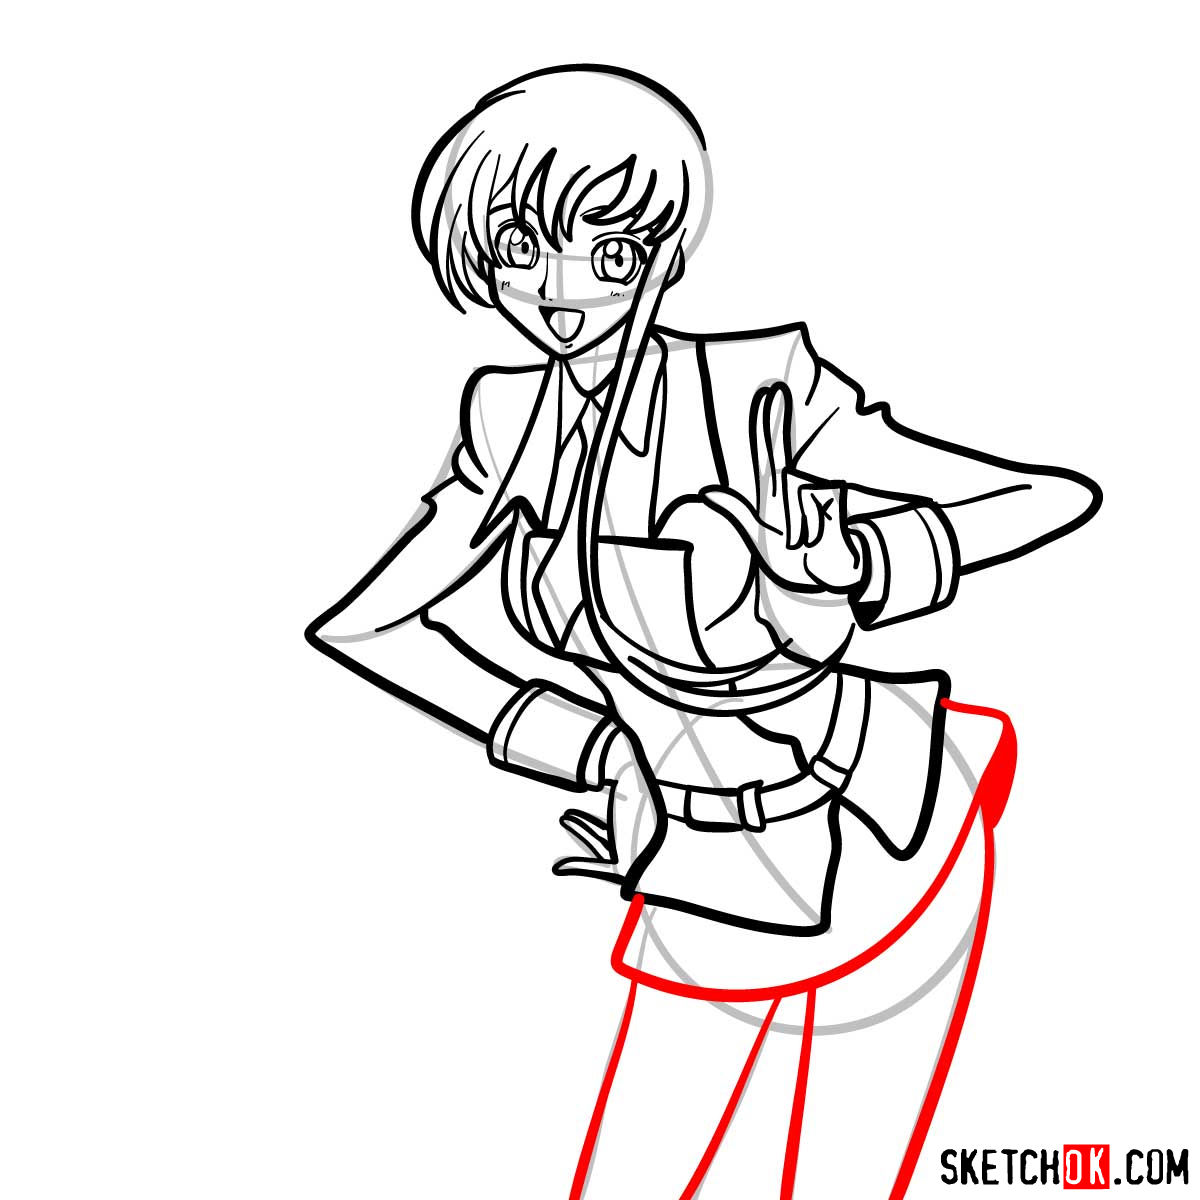 15 steps drawing guide of Shirley Fenette (Code Geass) - step 12